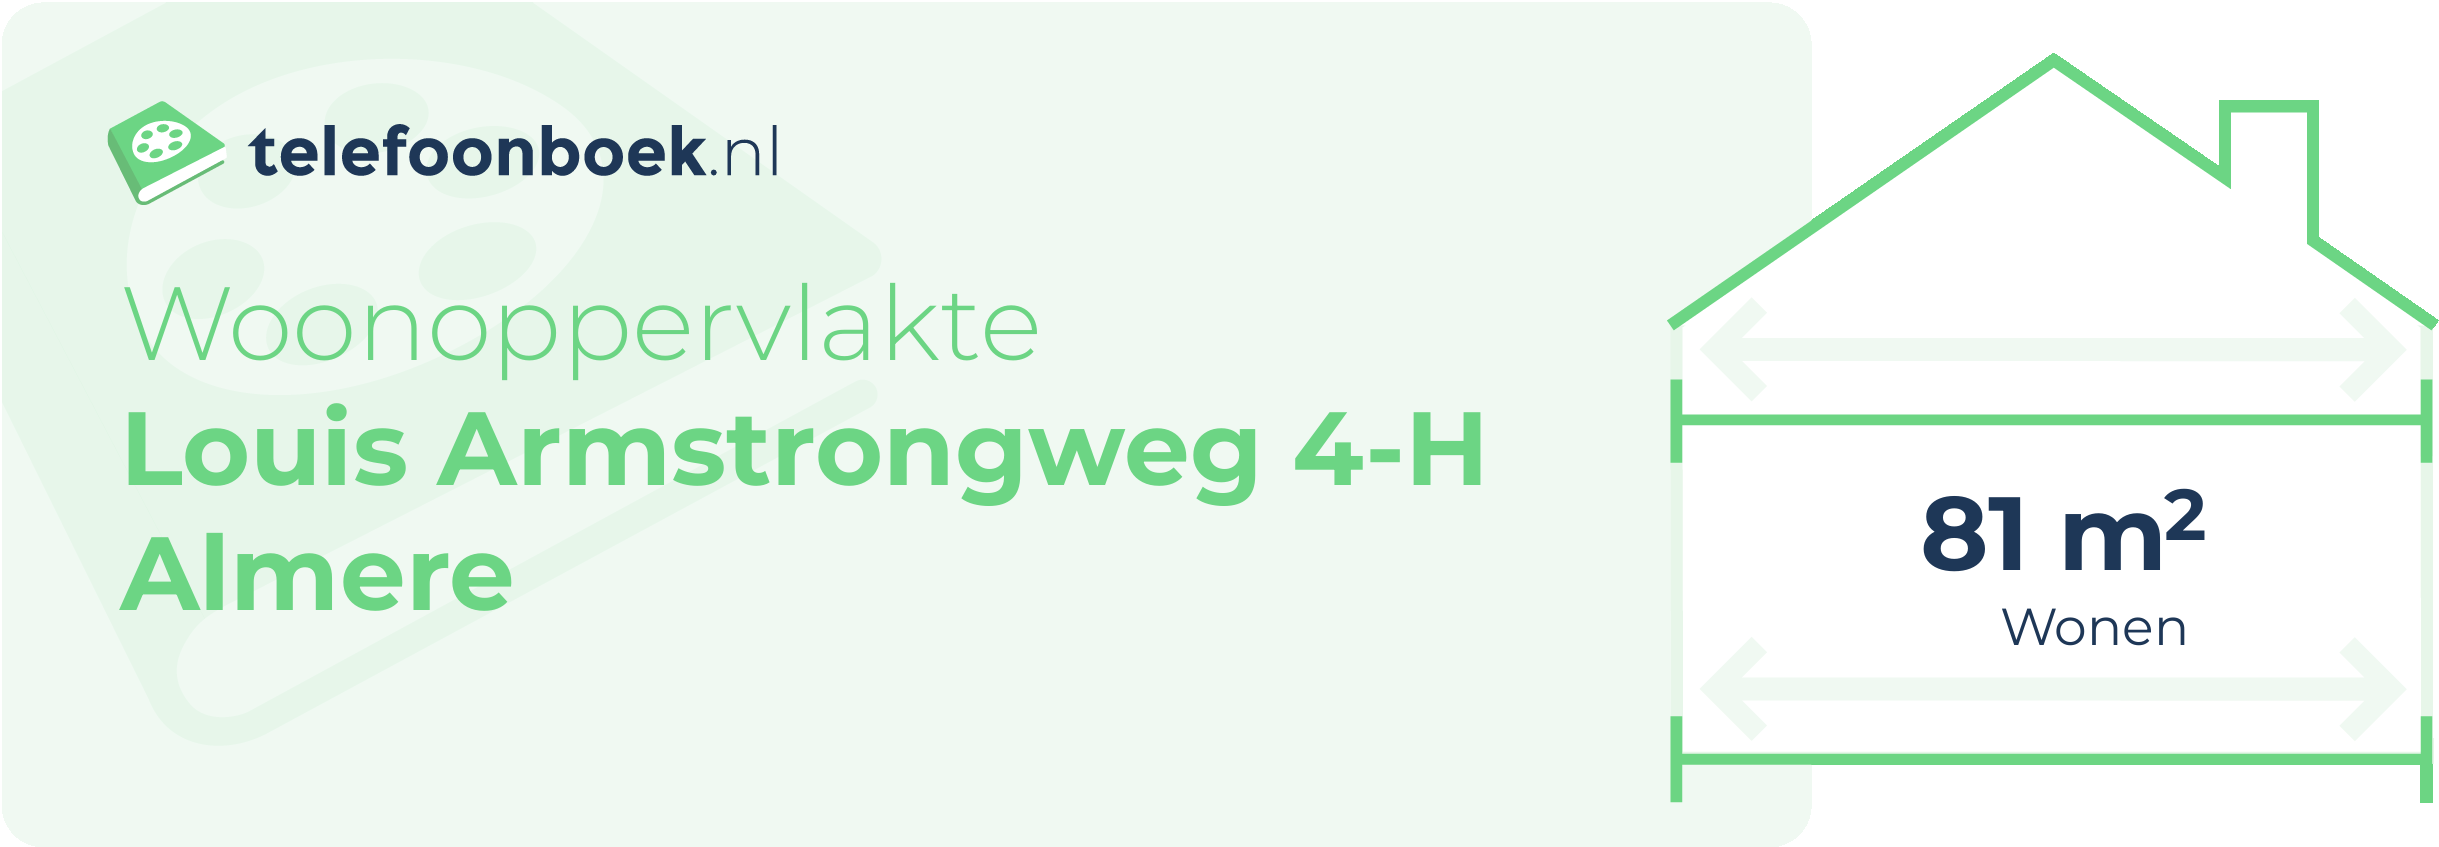 Woonoppervlakte Louis Armstrongweg 4-H Almere